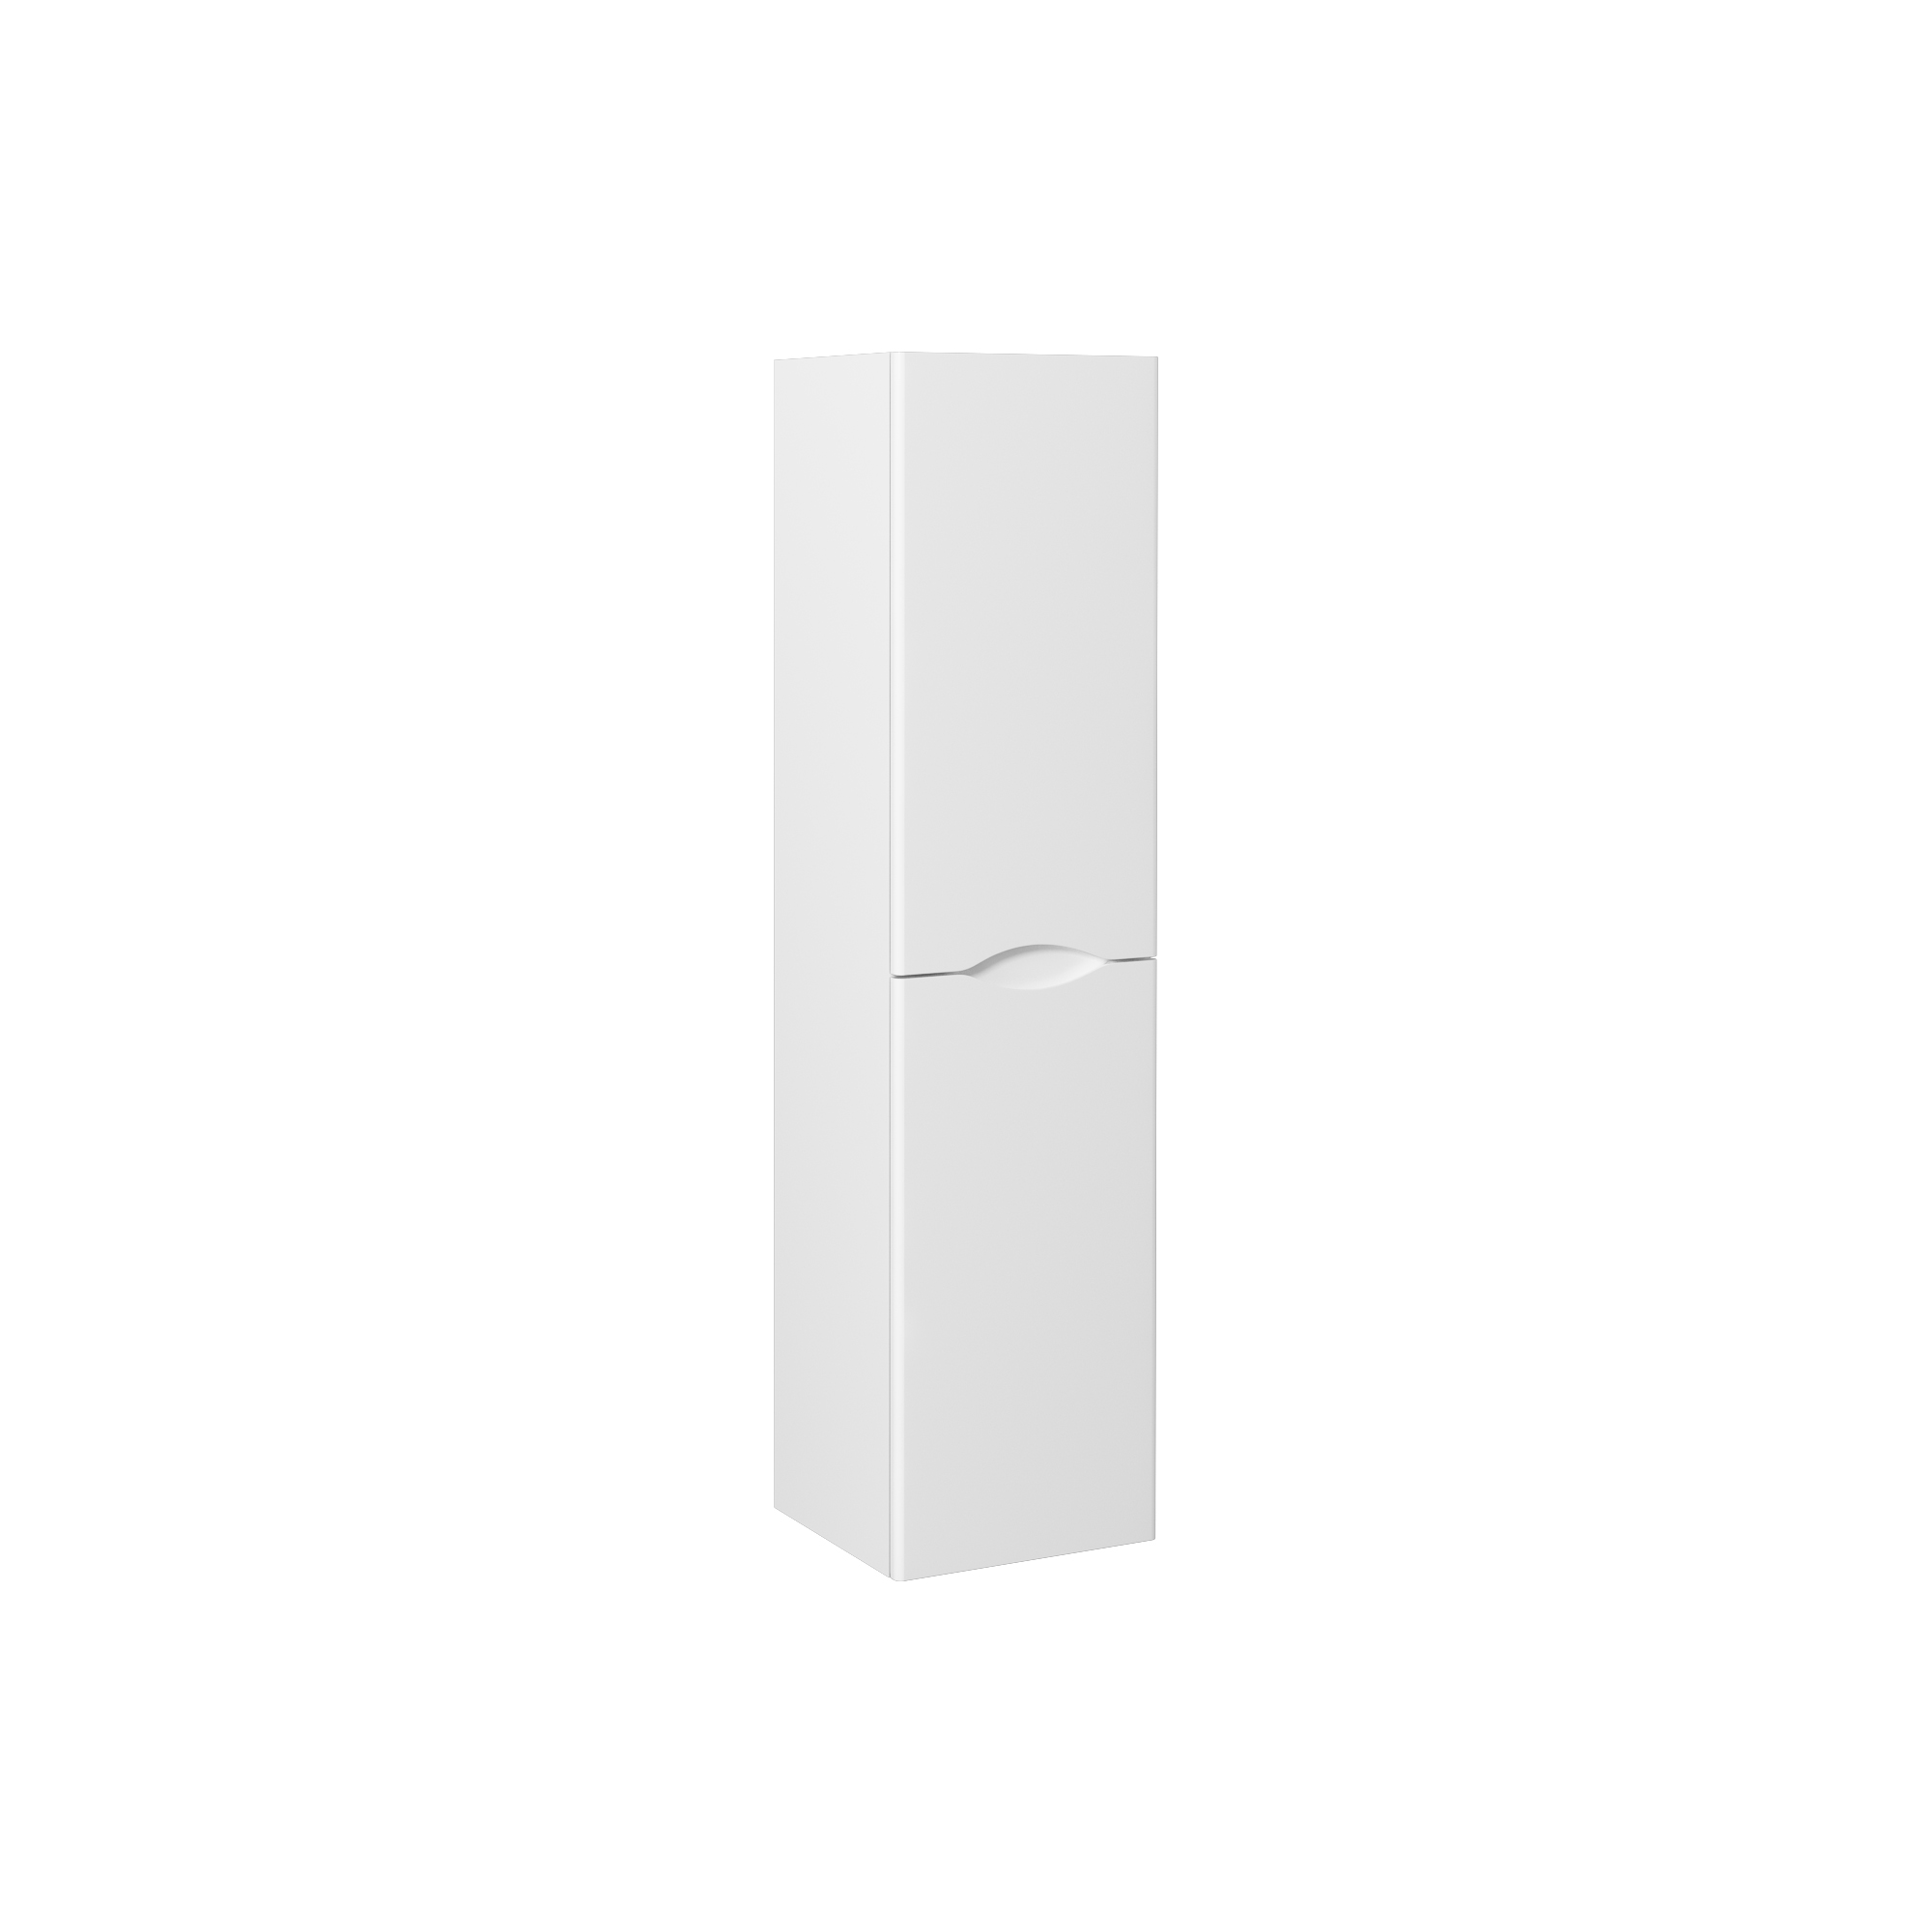 Neo 35 cm Tall Cabinet, White Right 